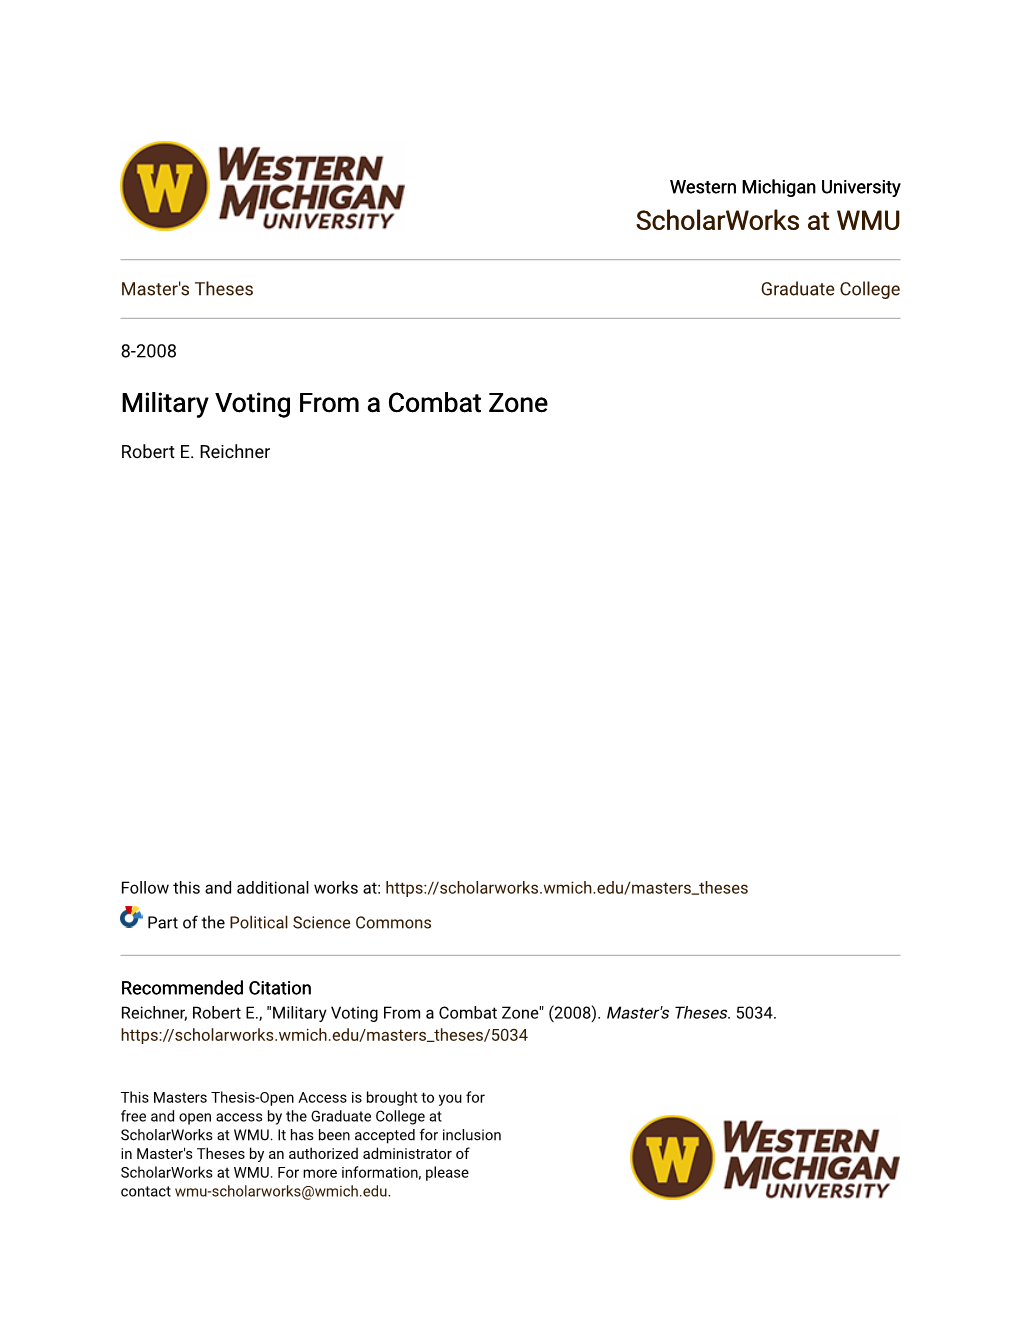 Military Voting from a Combat Zone